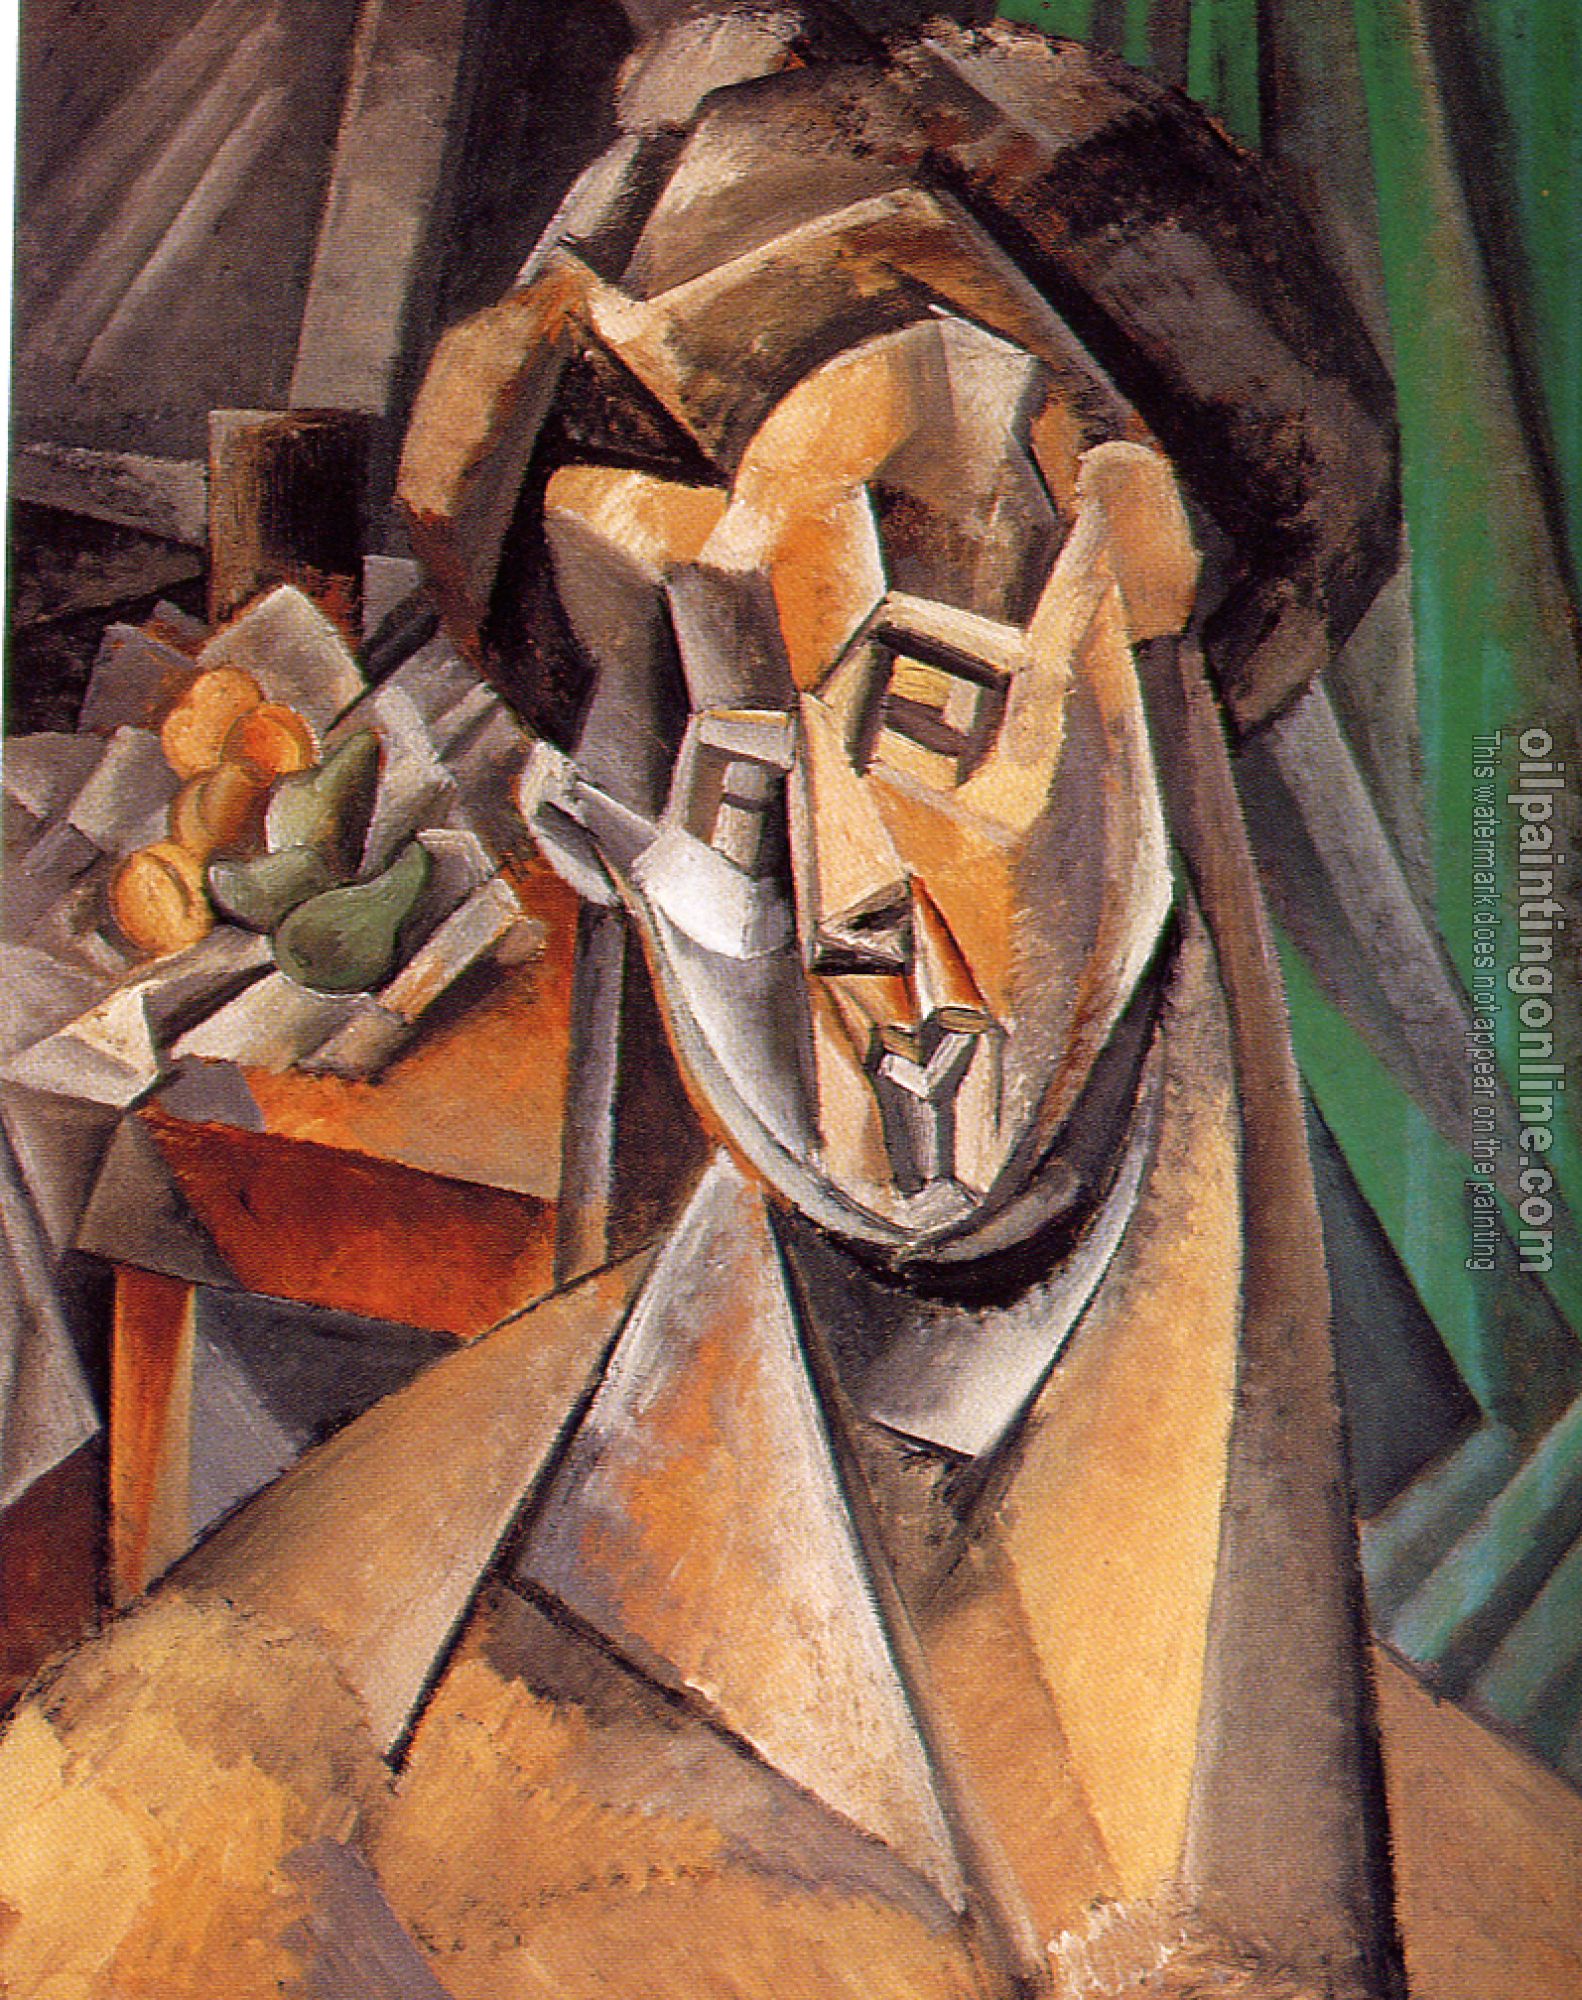 Picasso, Pablo - bust of a woman in front of a still life